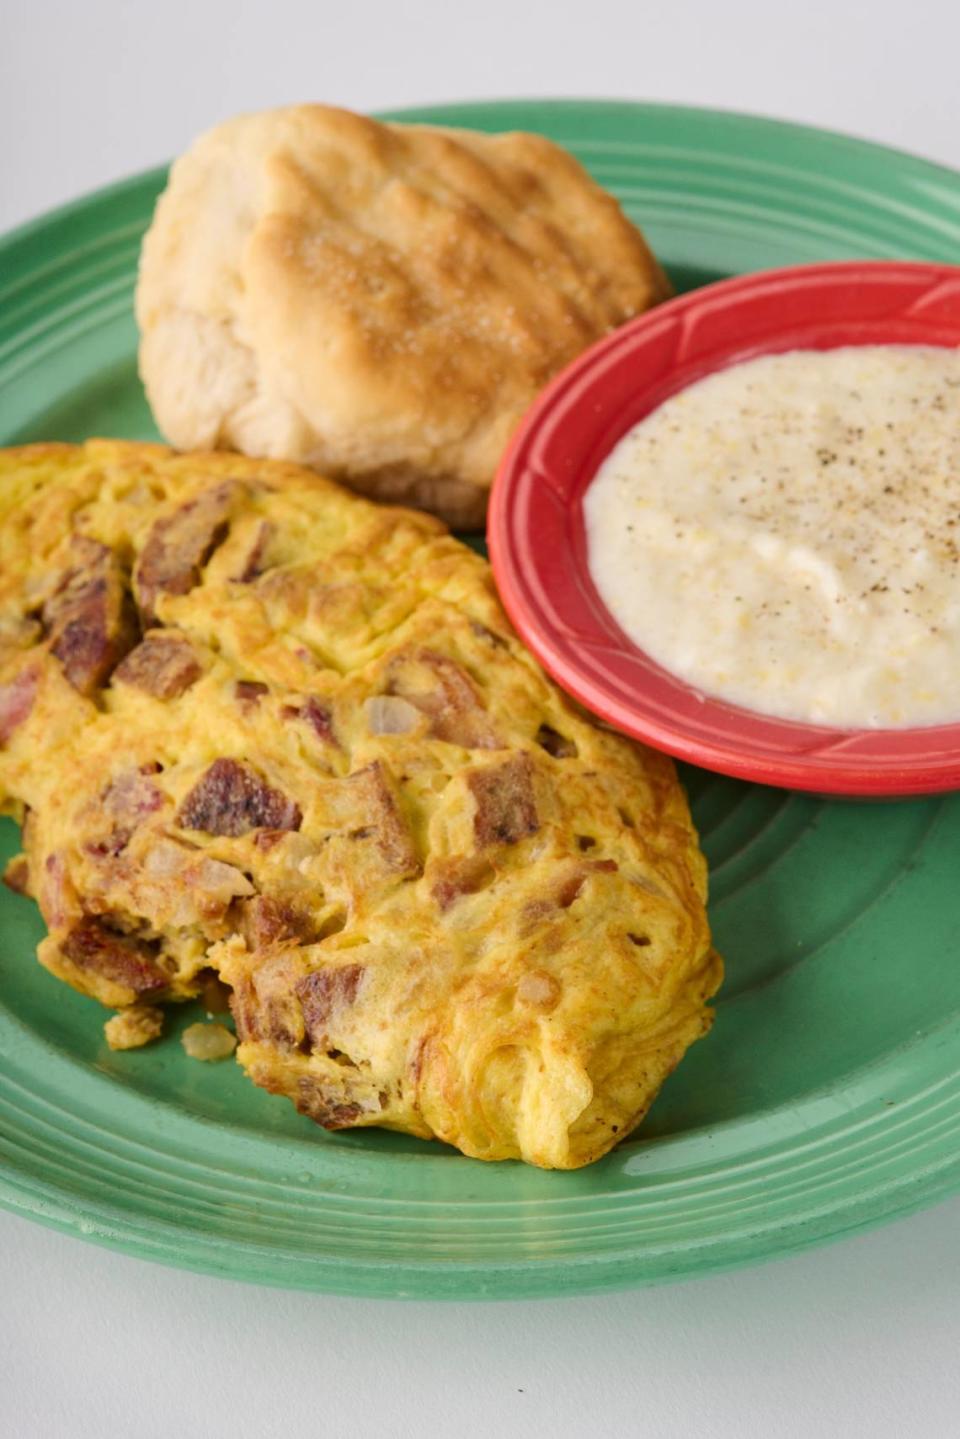 The Flying Biscuit Café will open in Highside Market in Columbus in December. This Atlanta-based restaurant chain offers breakfast and southern food. Courtesy of Frances Pettway, Huff and Co.